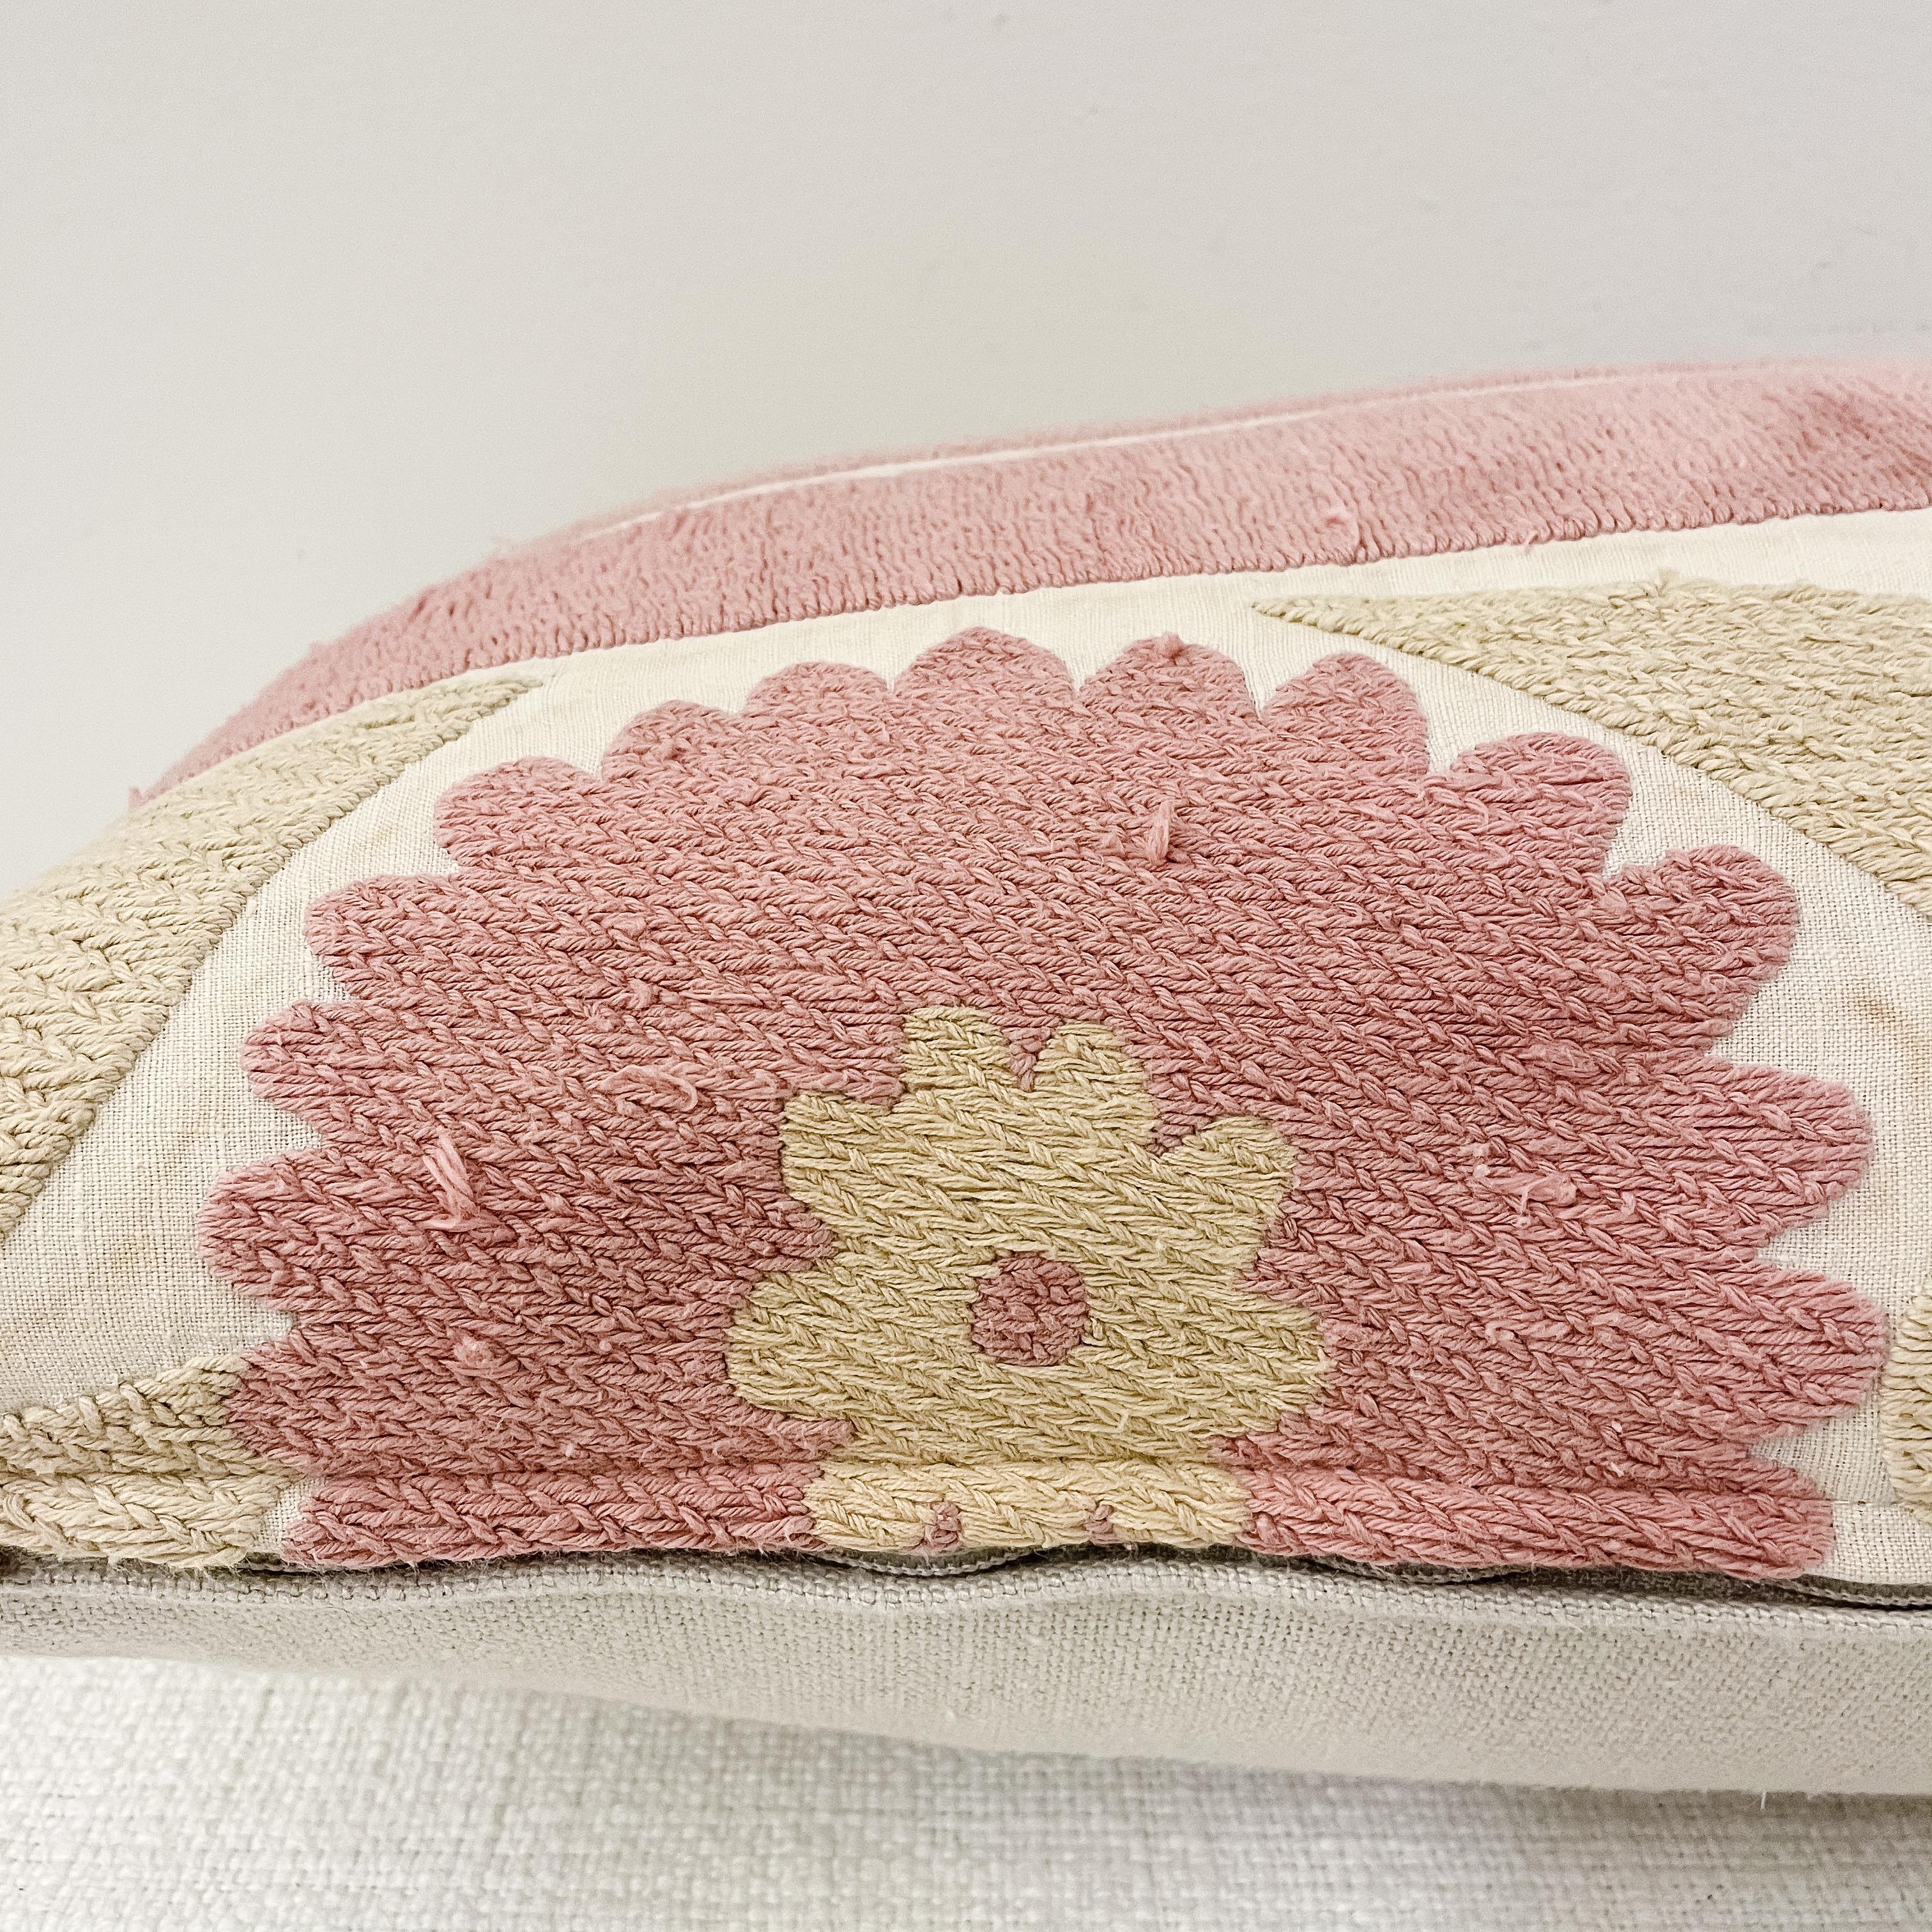 Cotton Vintage Pale Pink and Tan Embroidered Suzani Pillow with Down Feather Insert